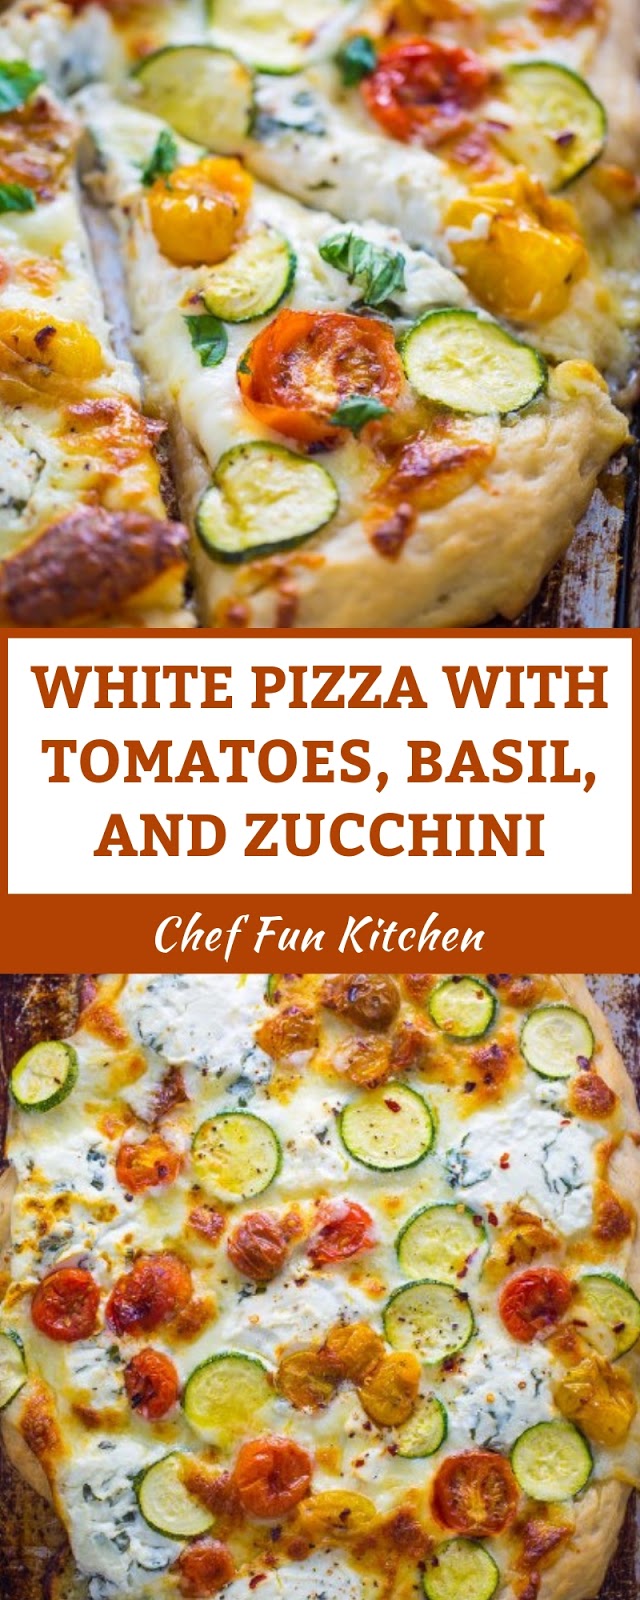 WHITE PIZZA WITH TOMATOES, BASIL, AND ZUCCHINI